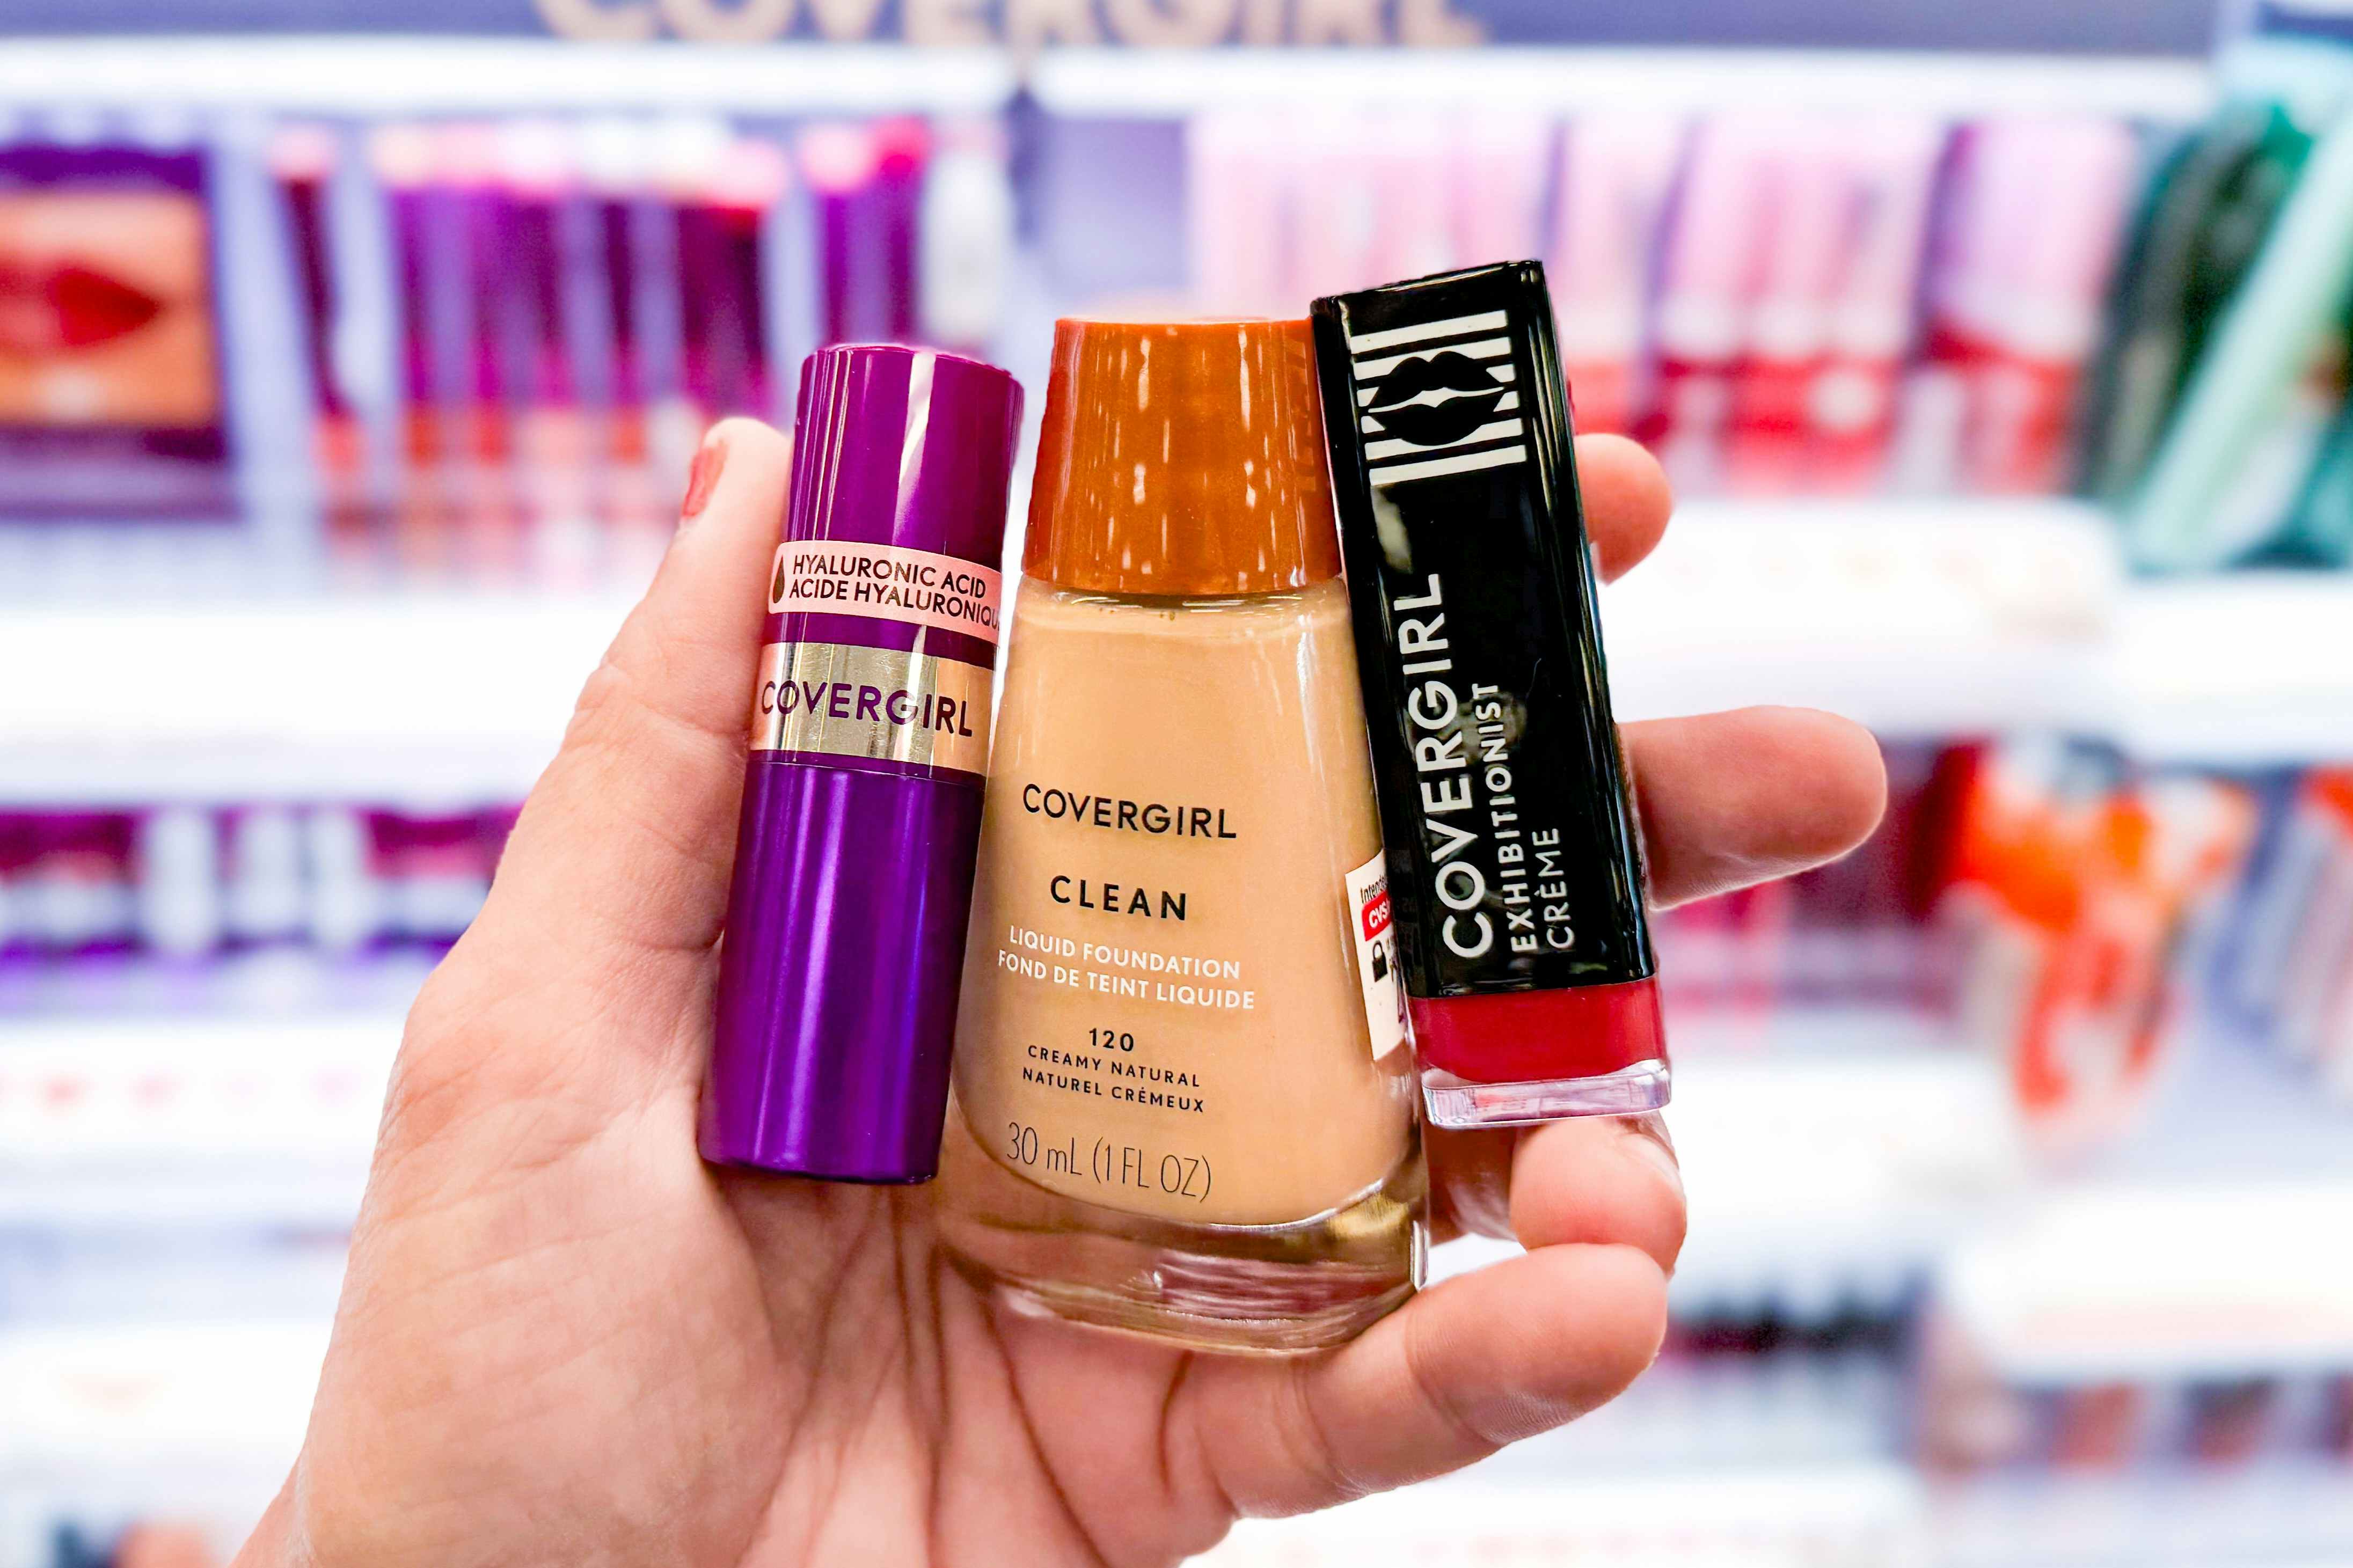 Score Covergirl Cosmetics for as Low as Free During CVS Last Chance Sale